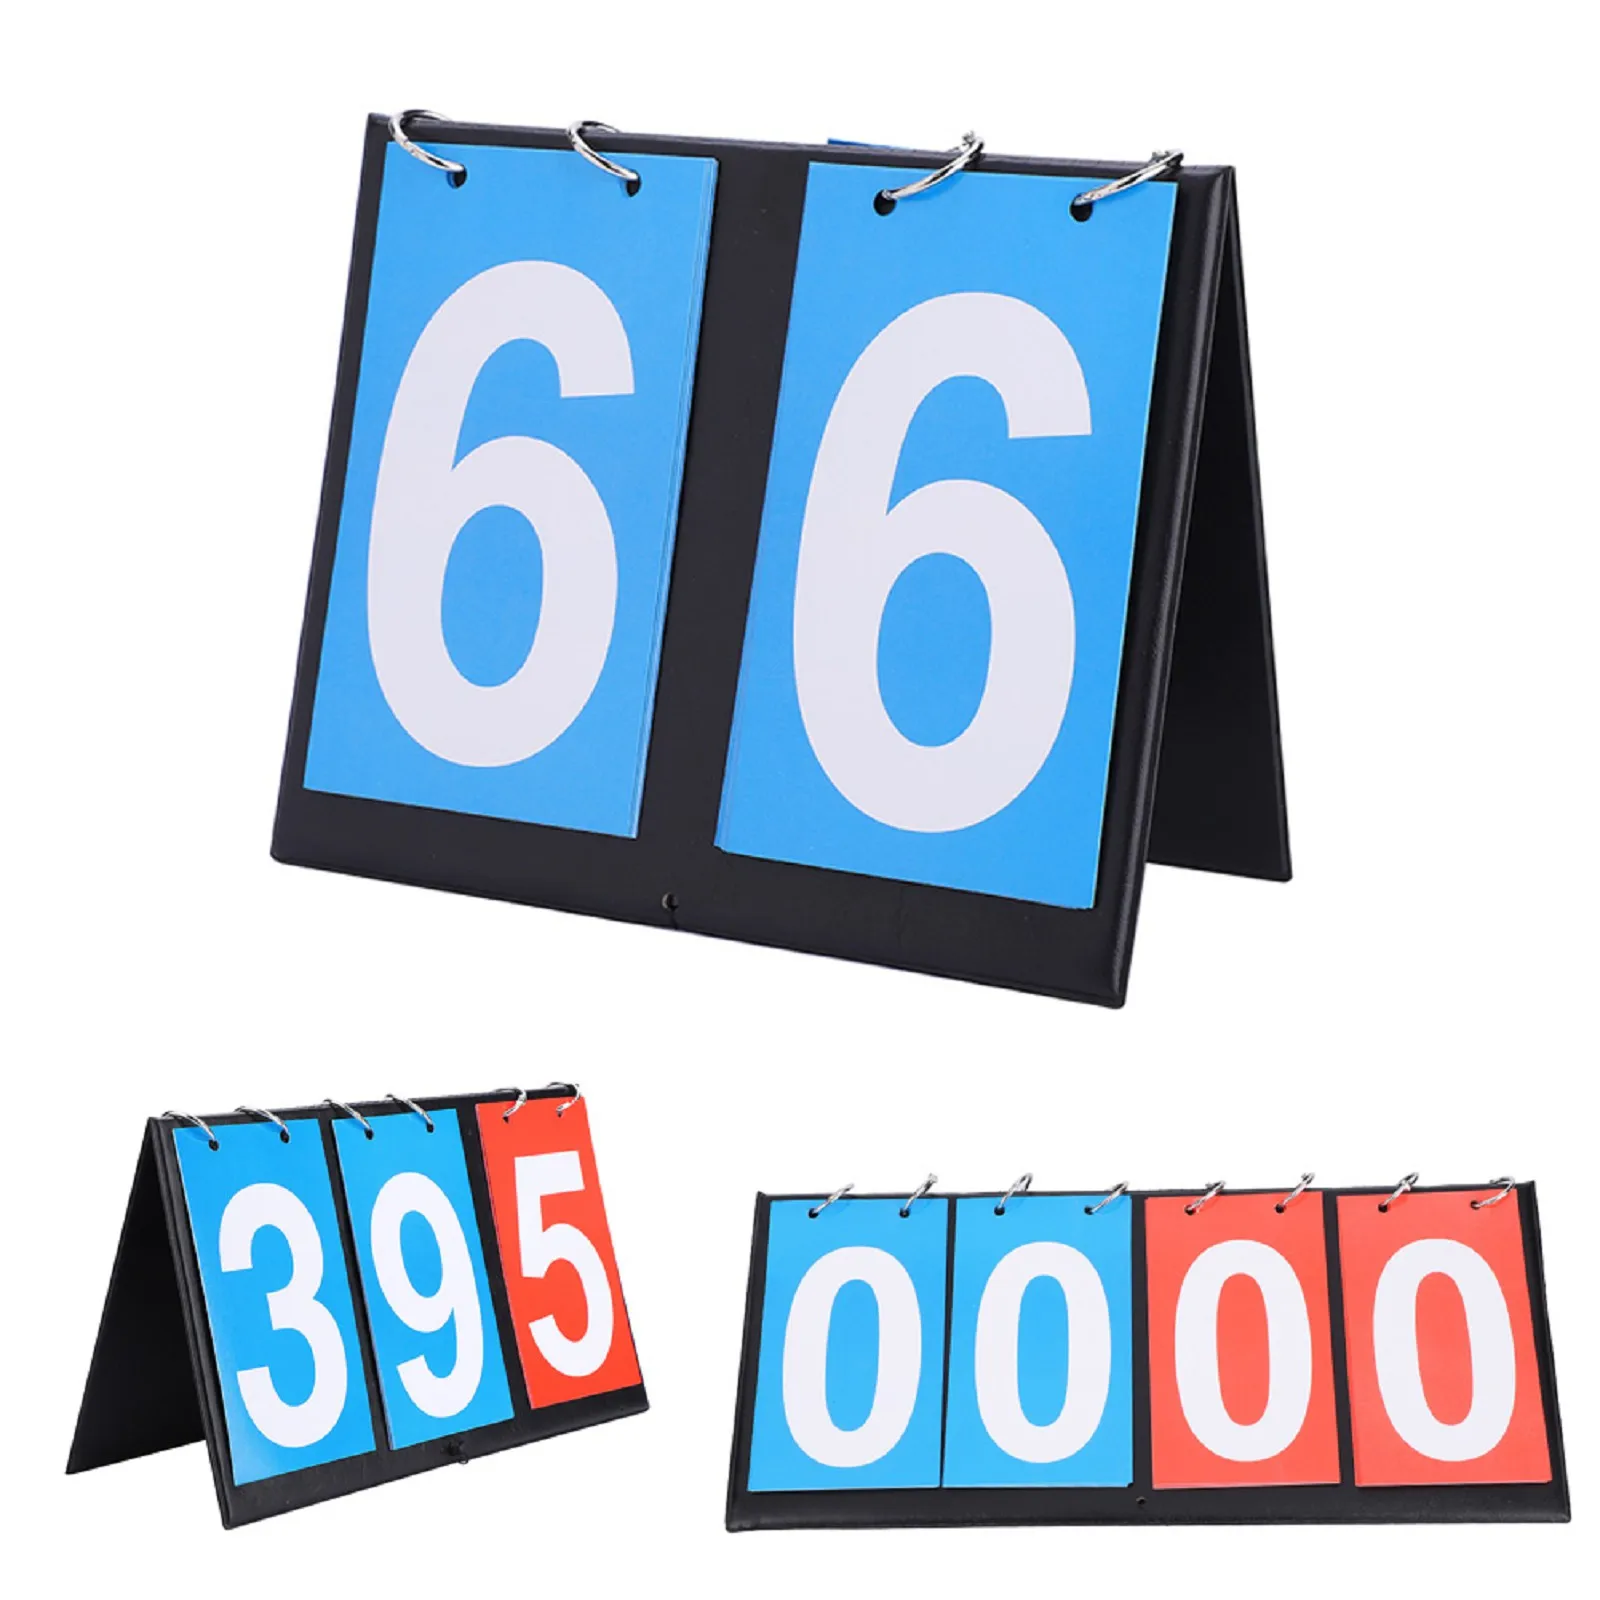 

Portable Flip 2/3/4 Digit Sports Competition ScoreBoard for Table Tennis Basketball Badminton Football Volleyball Score Boards